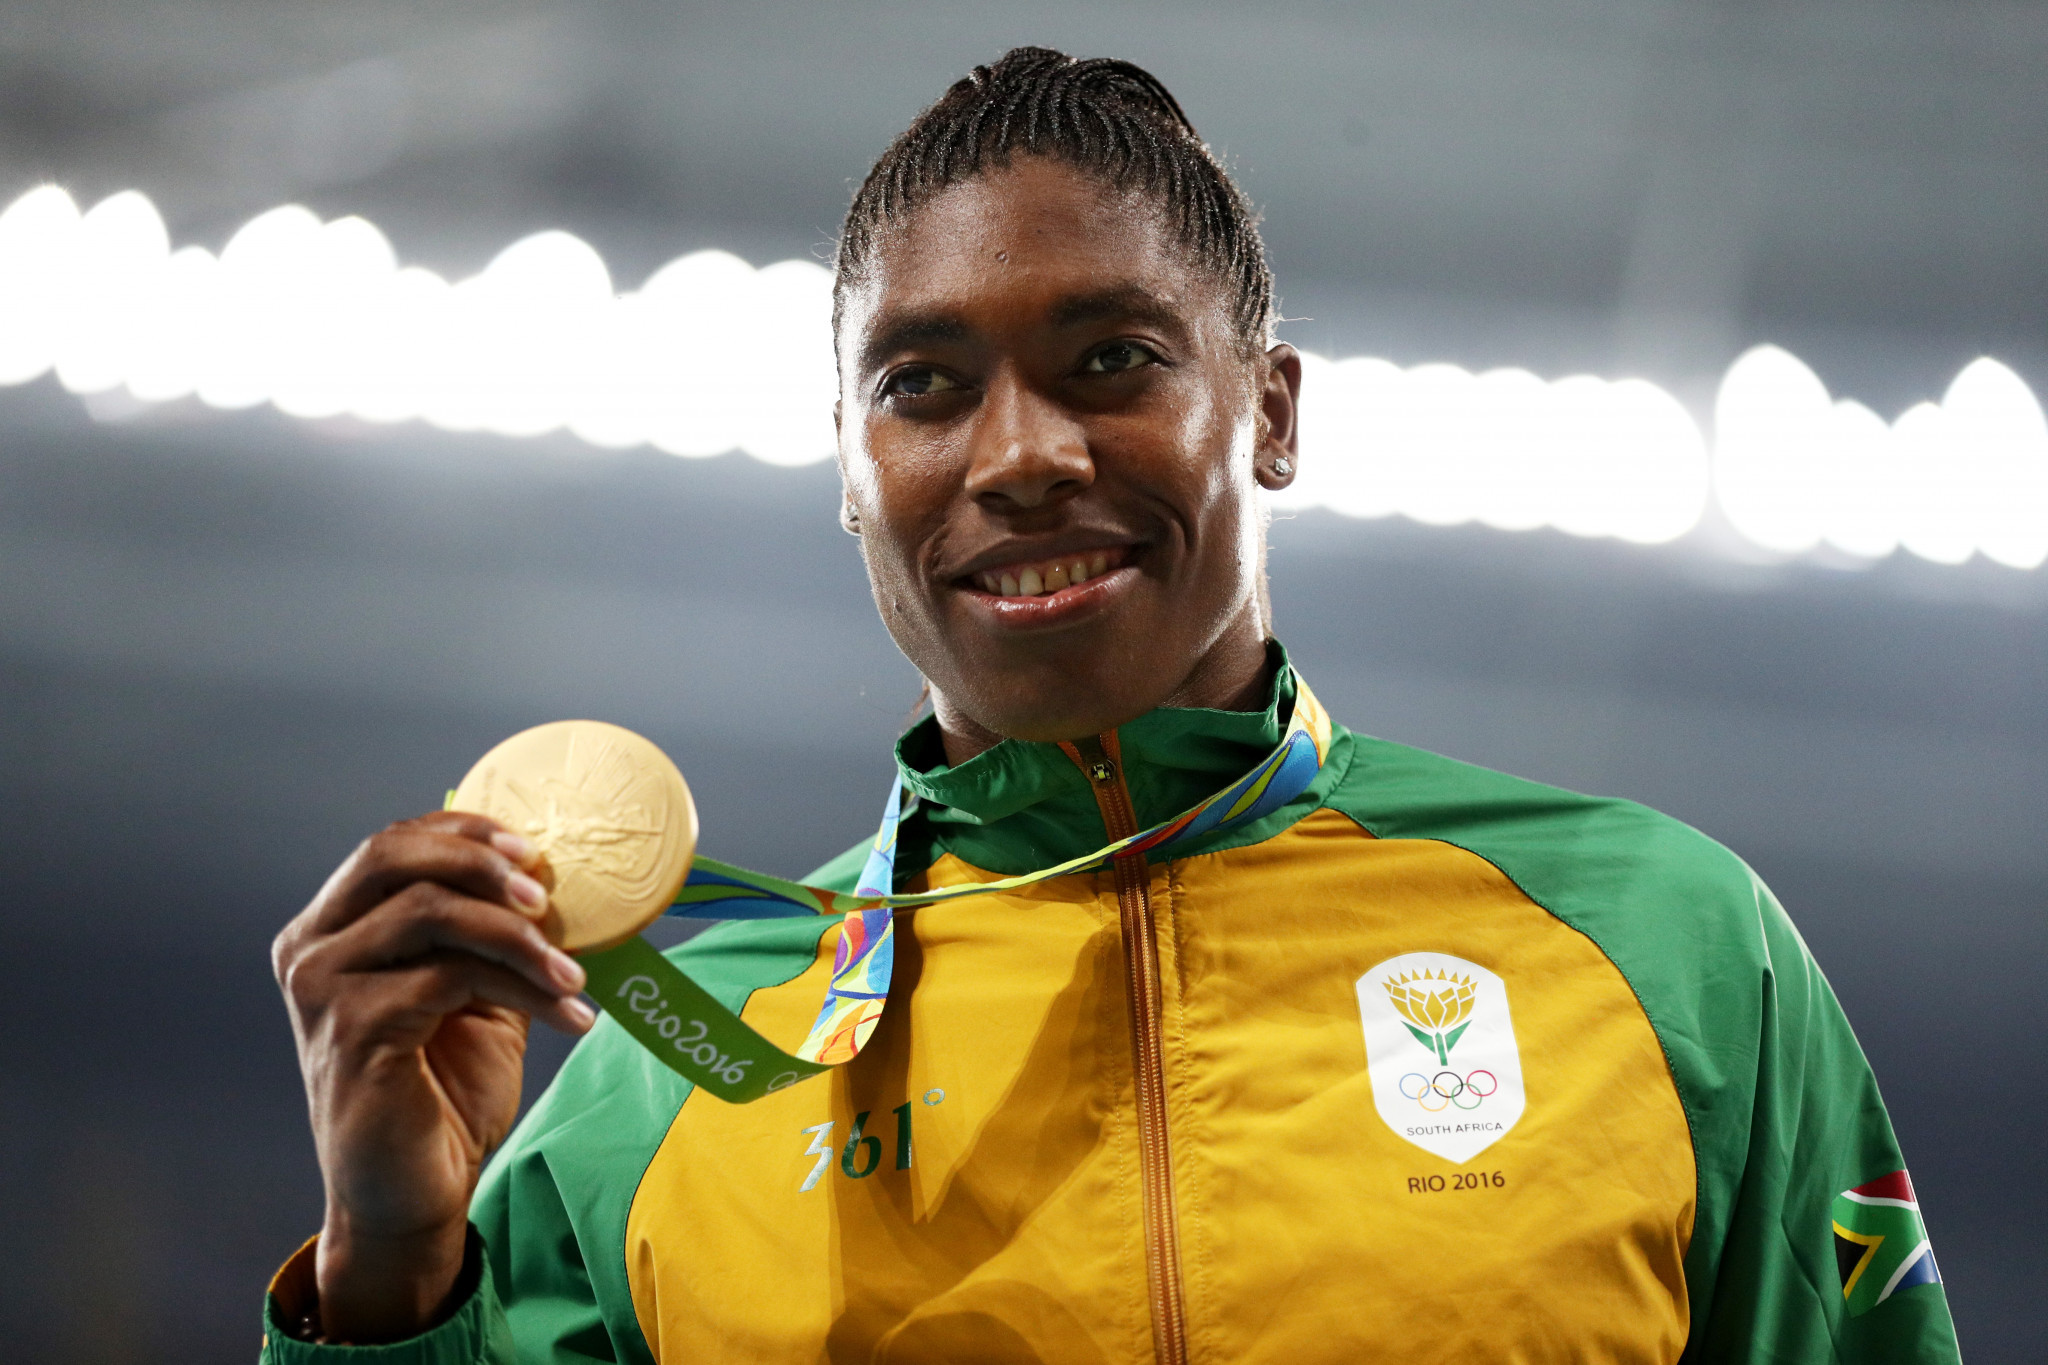 Caster Semenya of South Africa won Olympic gold medals in the women's 800m at London 2012 and Rio 2016, but could not compete in the distance at Tokyo 2020 ©Getty Images